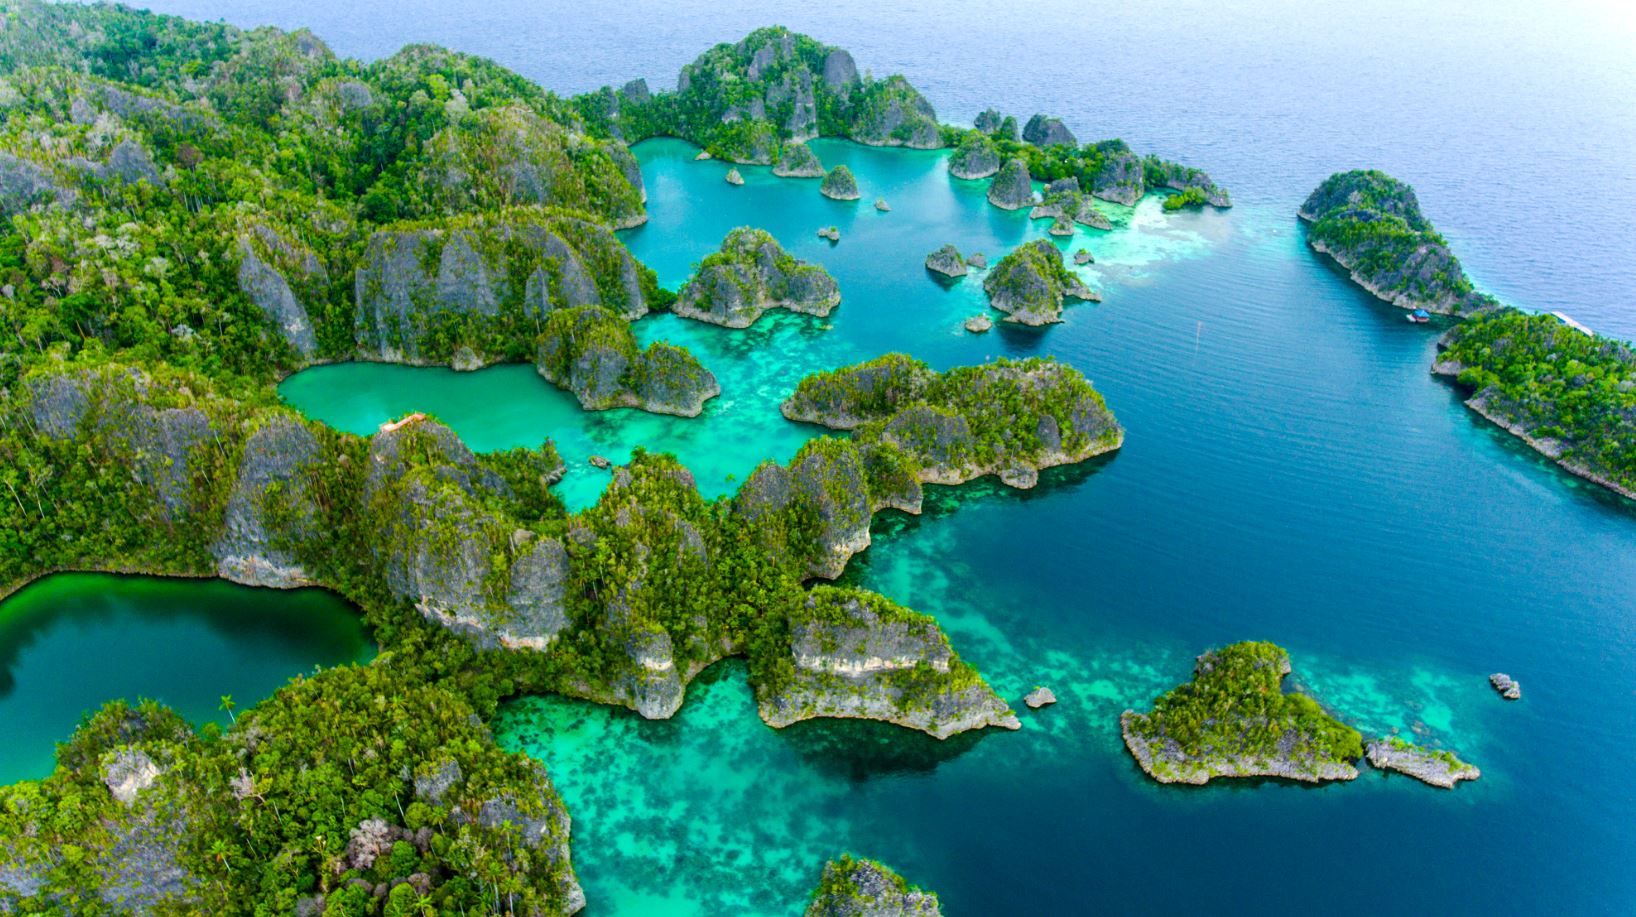 When is the best time to go to Raja Ampat? The climate of Raja Ampat